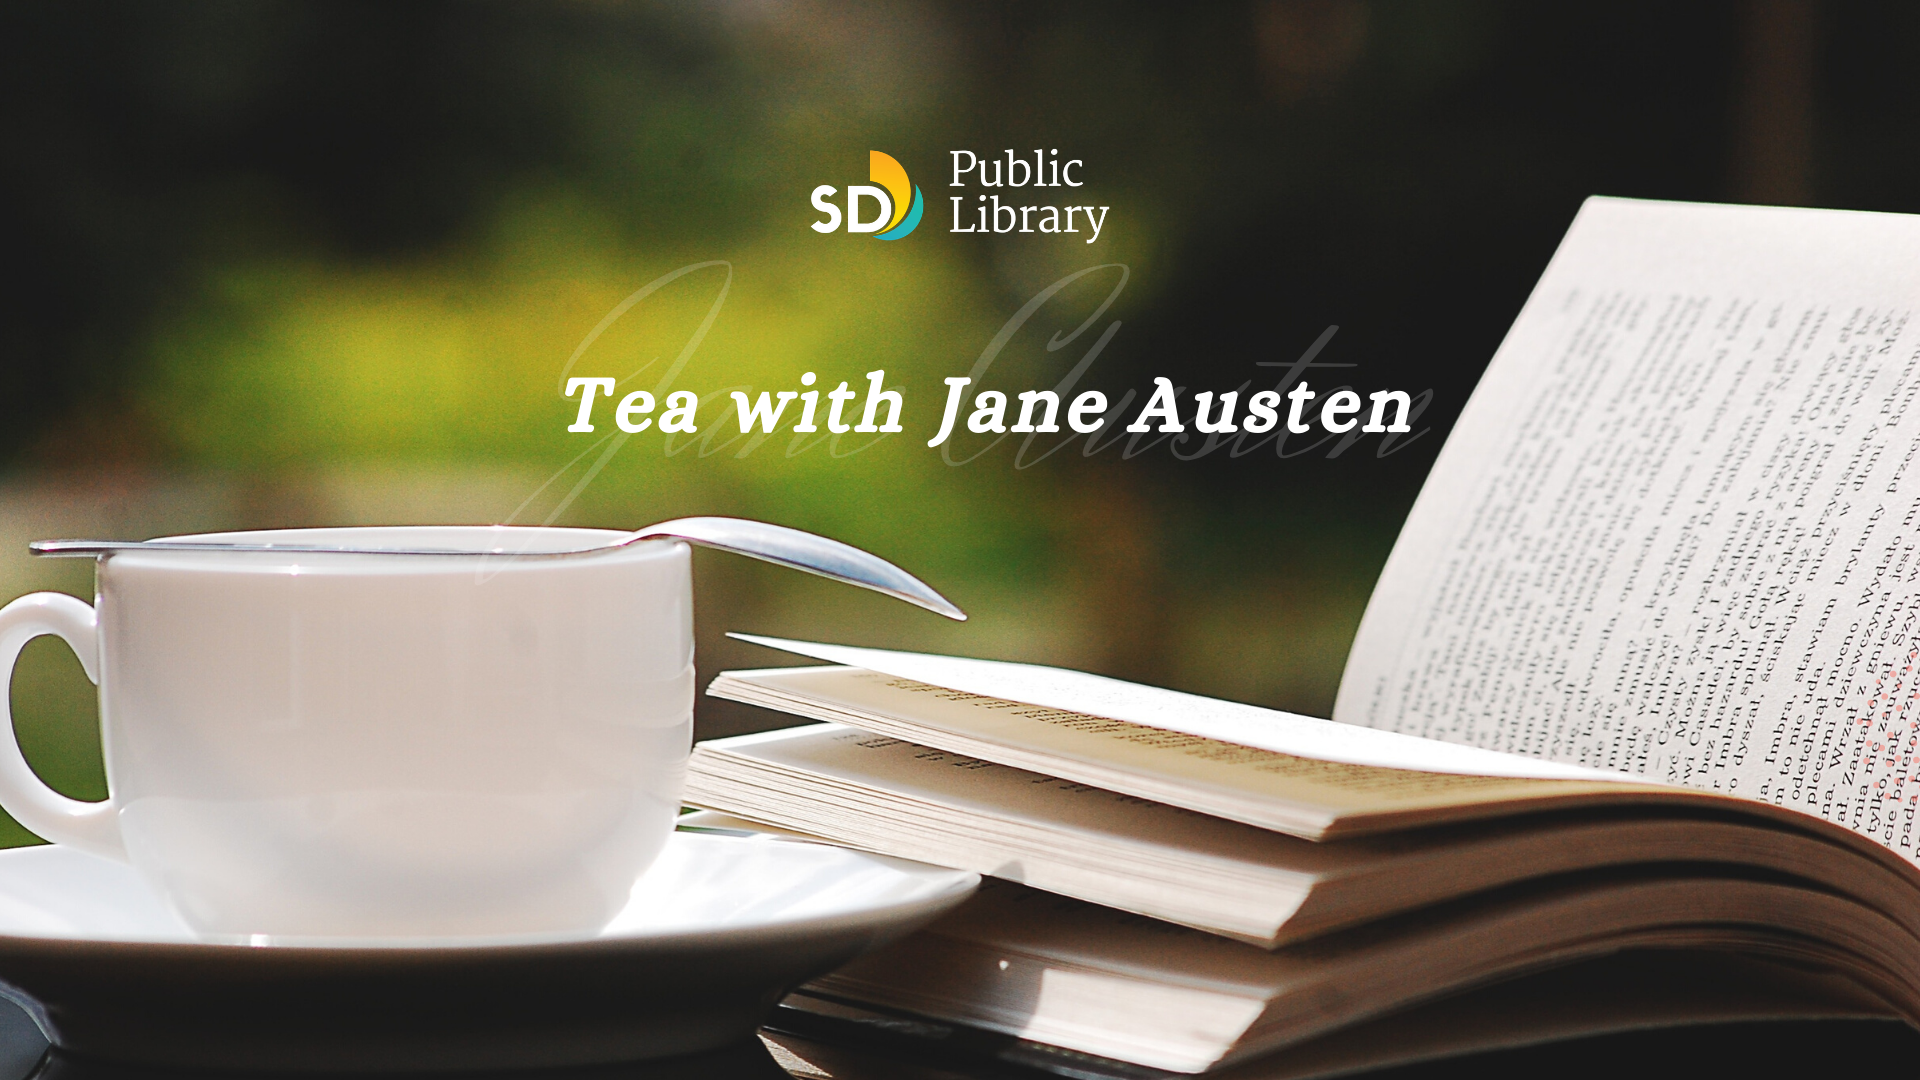 Tea cup and open book, with the words "Tea with Jane Austen"